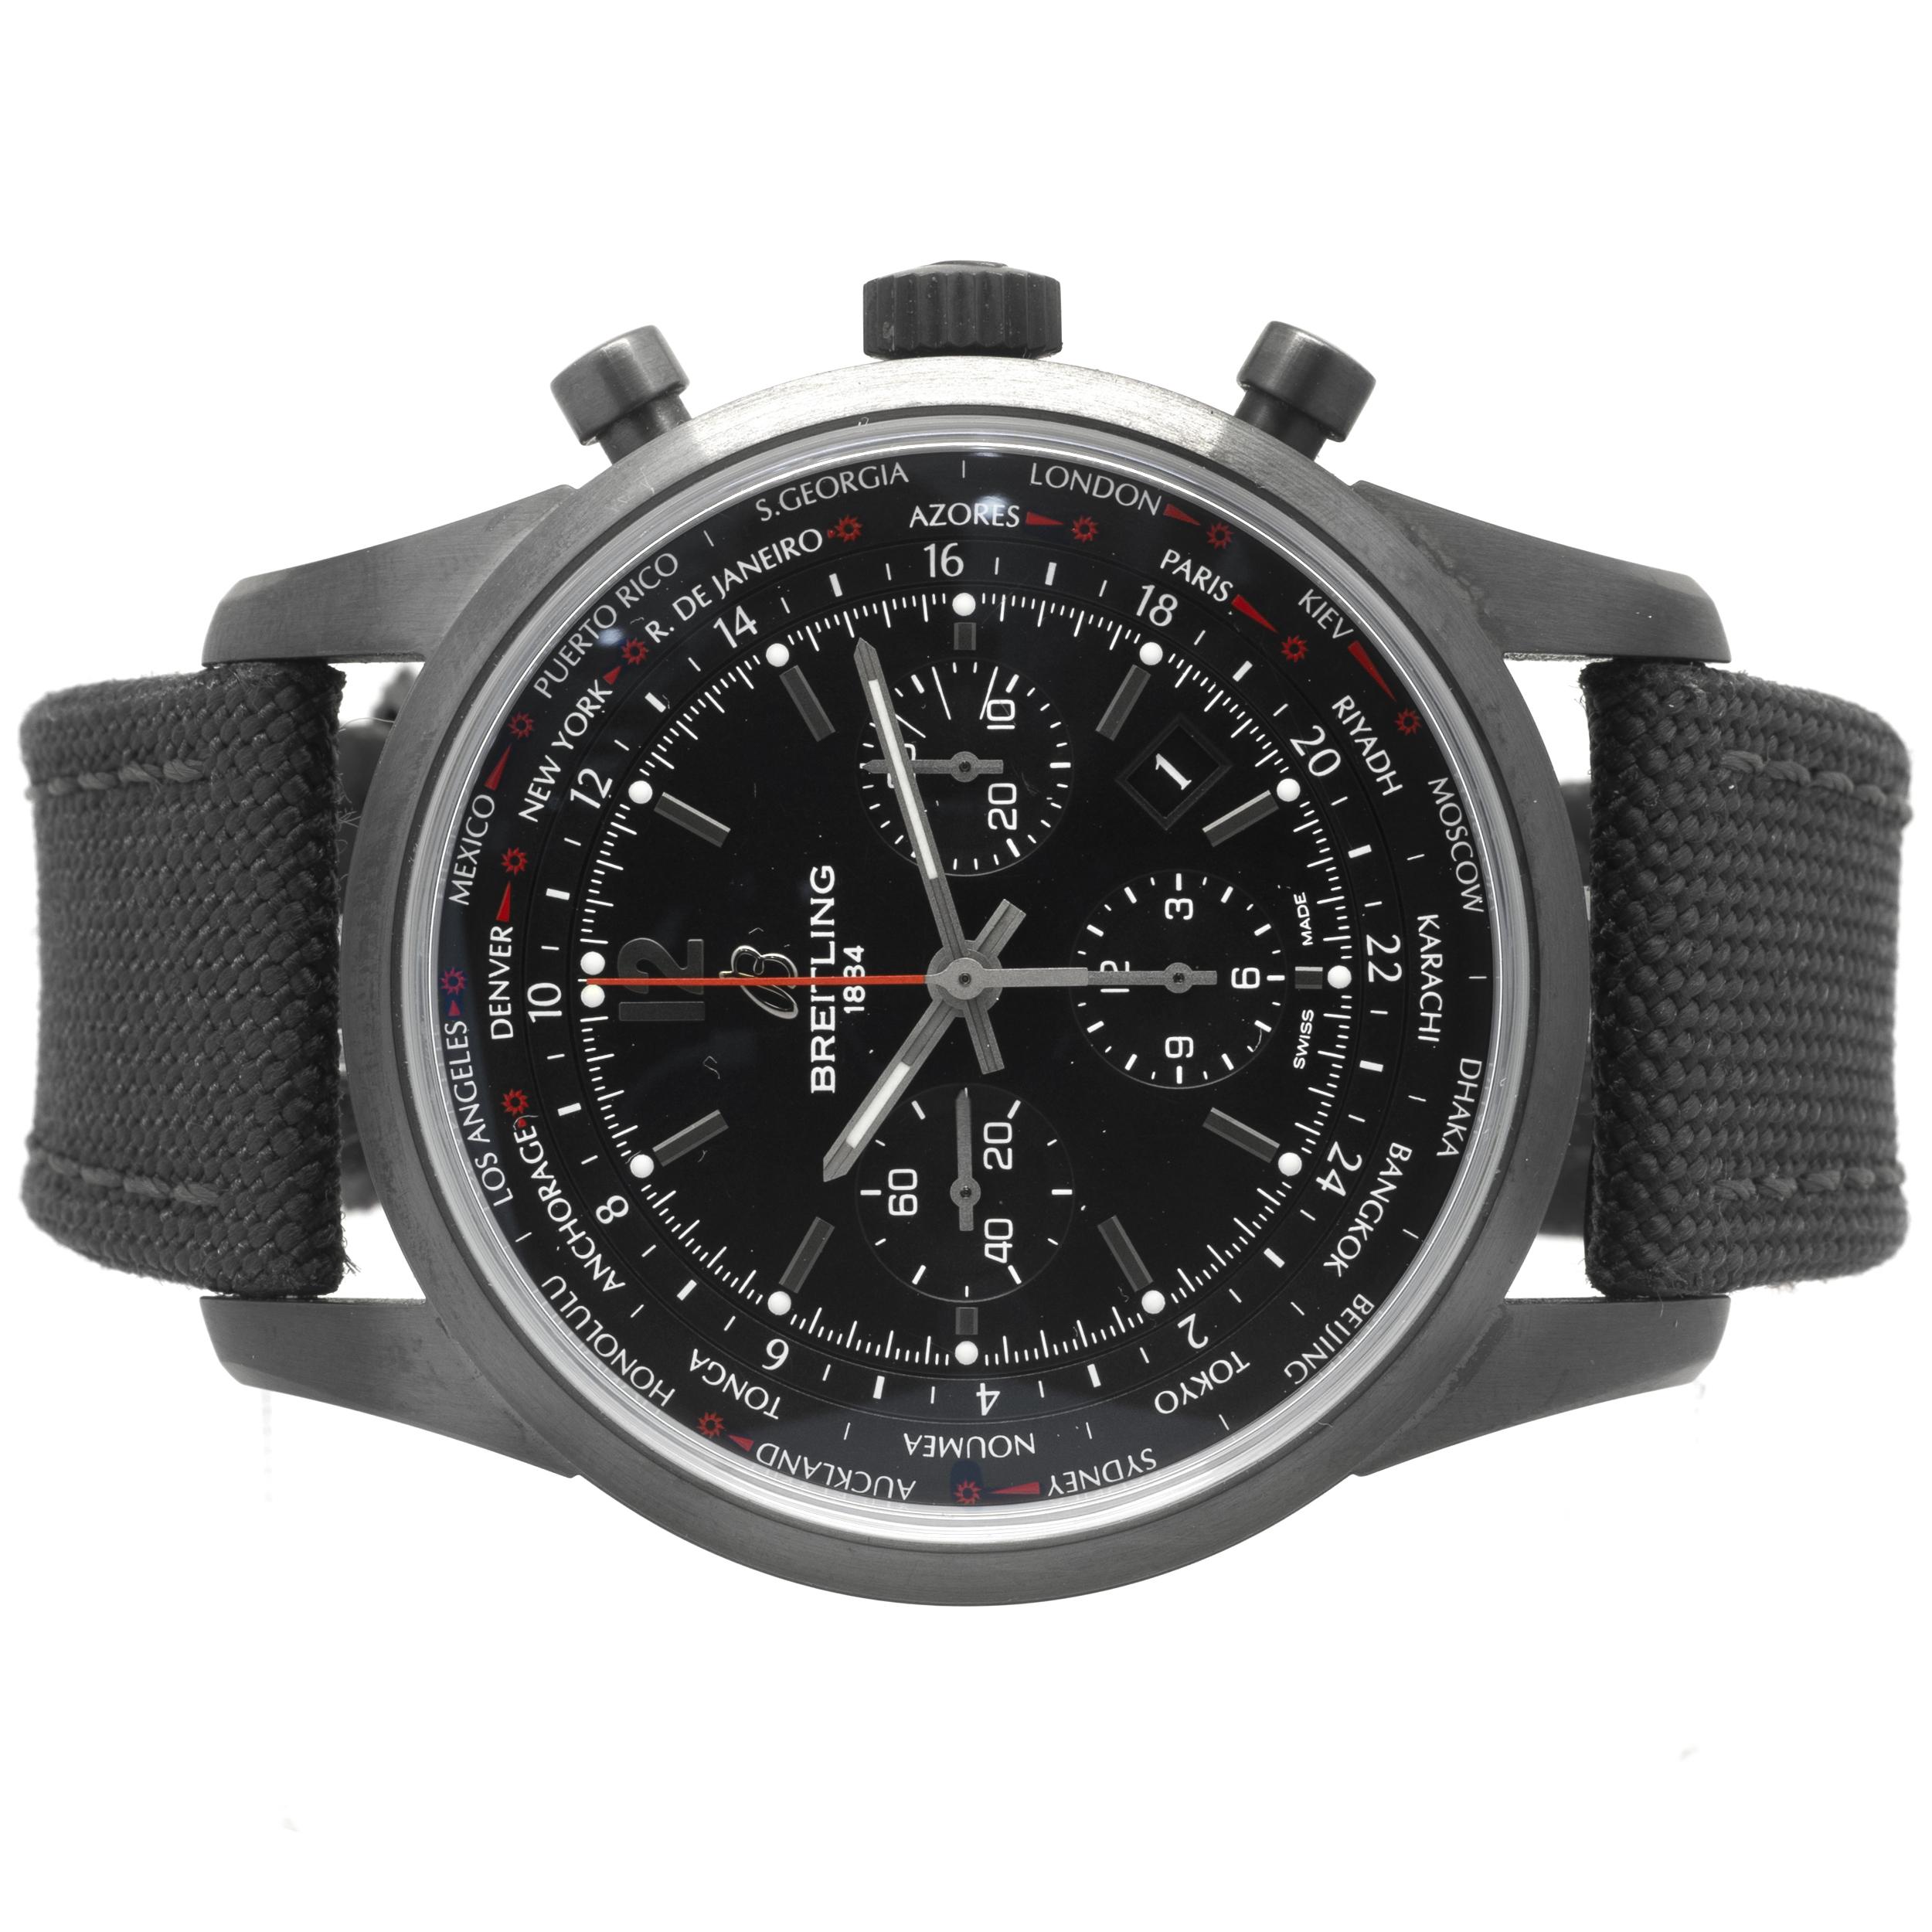 Movement: automatic
Function: hours, minutes, seconds, date, chronograph
Case: round 46mm black PVD stainless steel, sapphire protective crystal, Breitling engraved case-back, screw-down crown, water resistant to 100 meters
Band: Breitling rubber